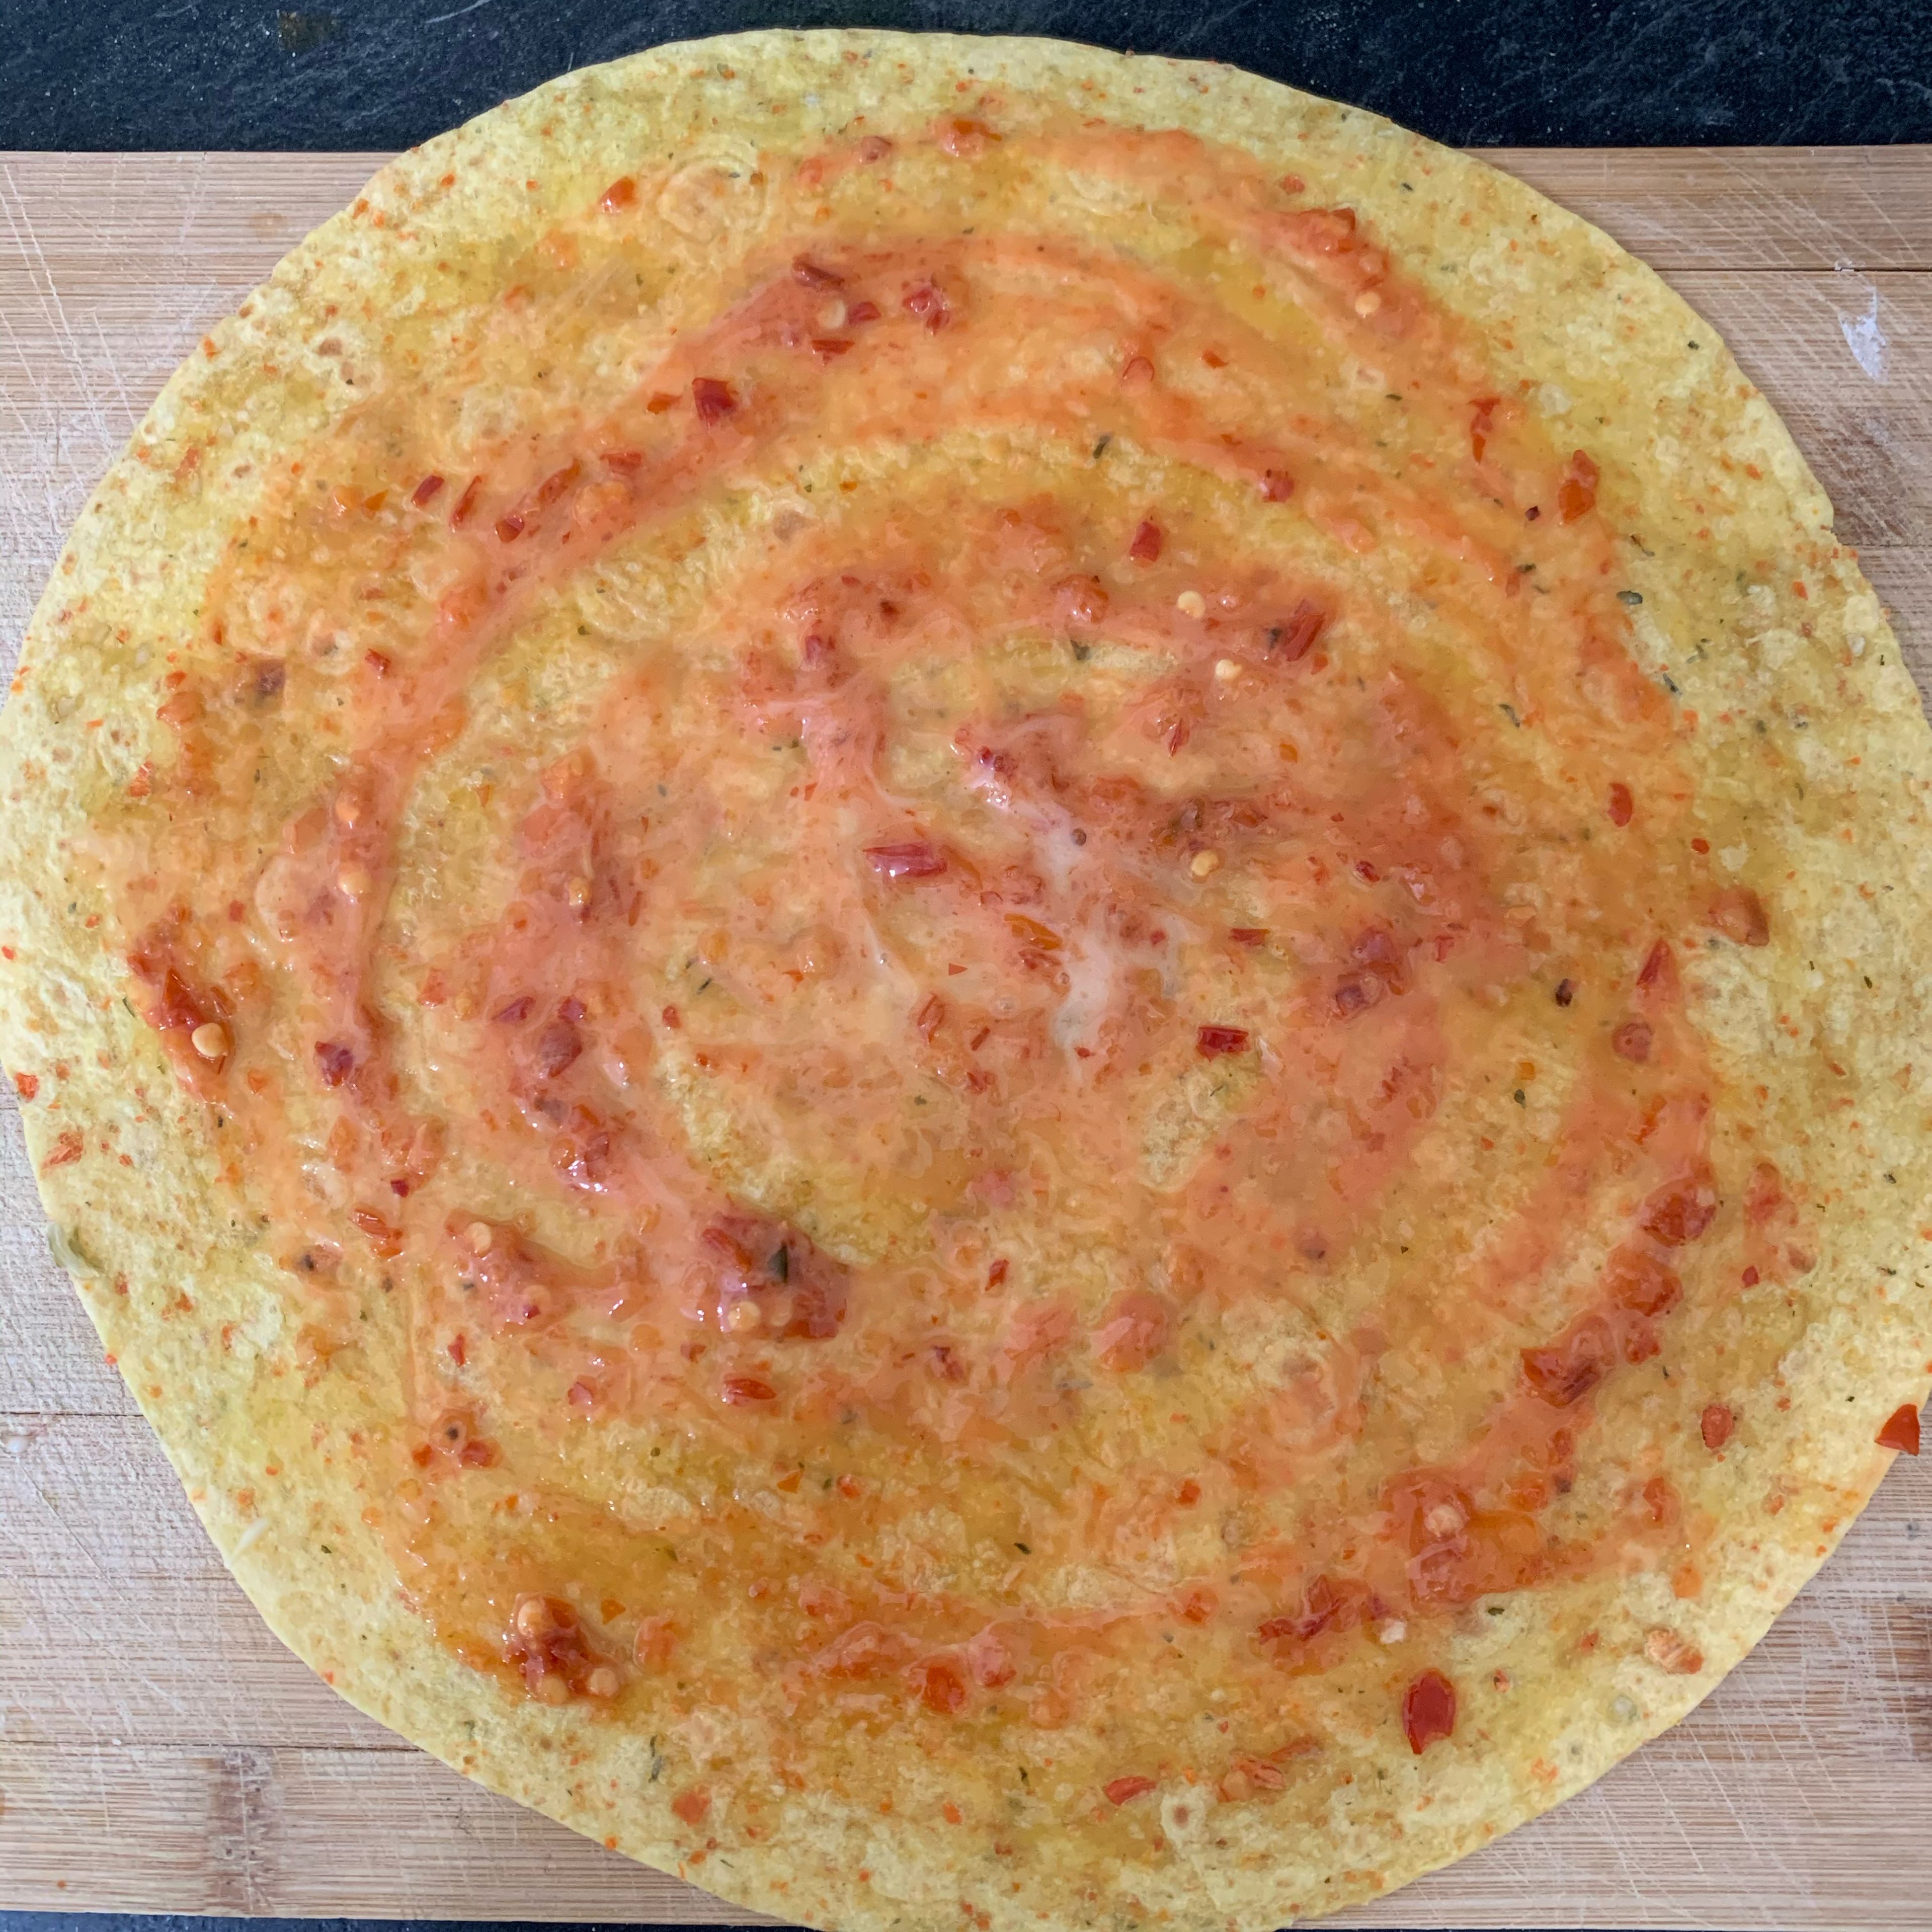 Add chilli sauce and coleslaw dressing on large-size tortilla and spread it evenly all over the base.